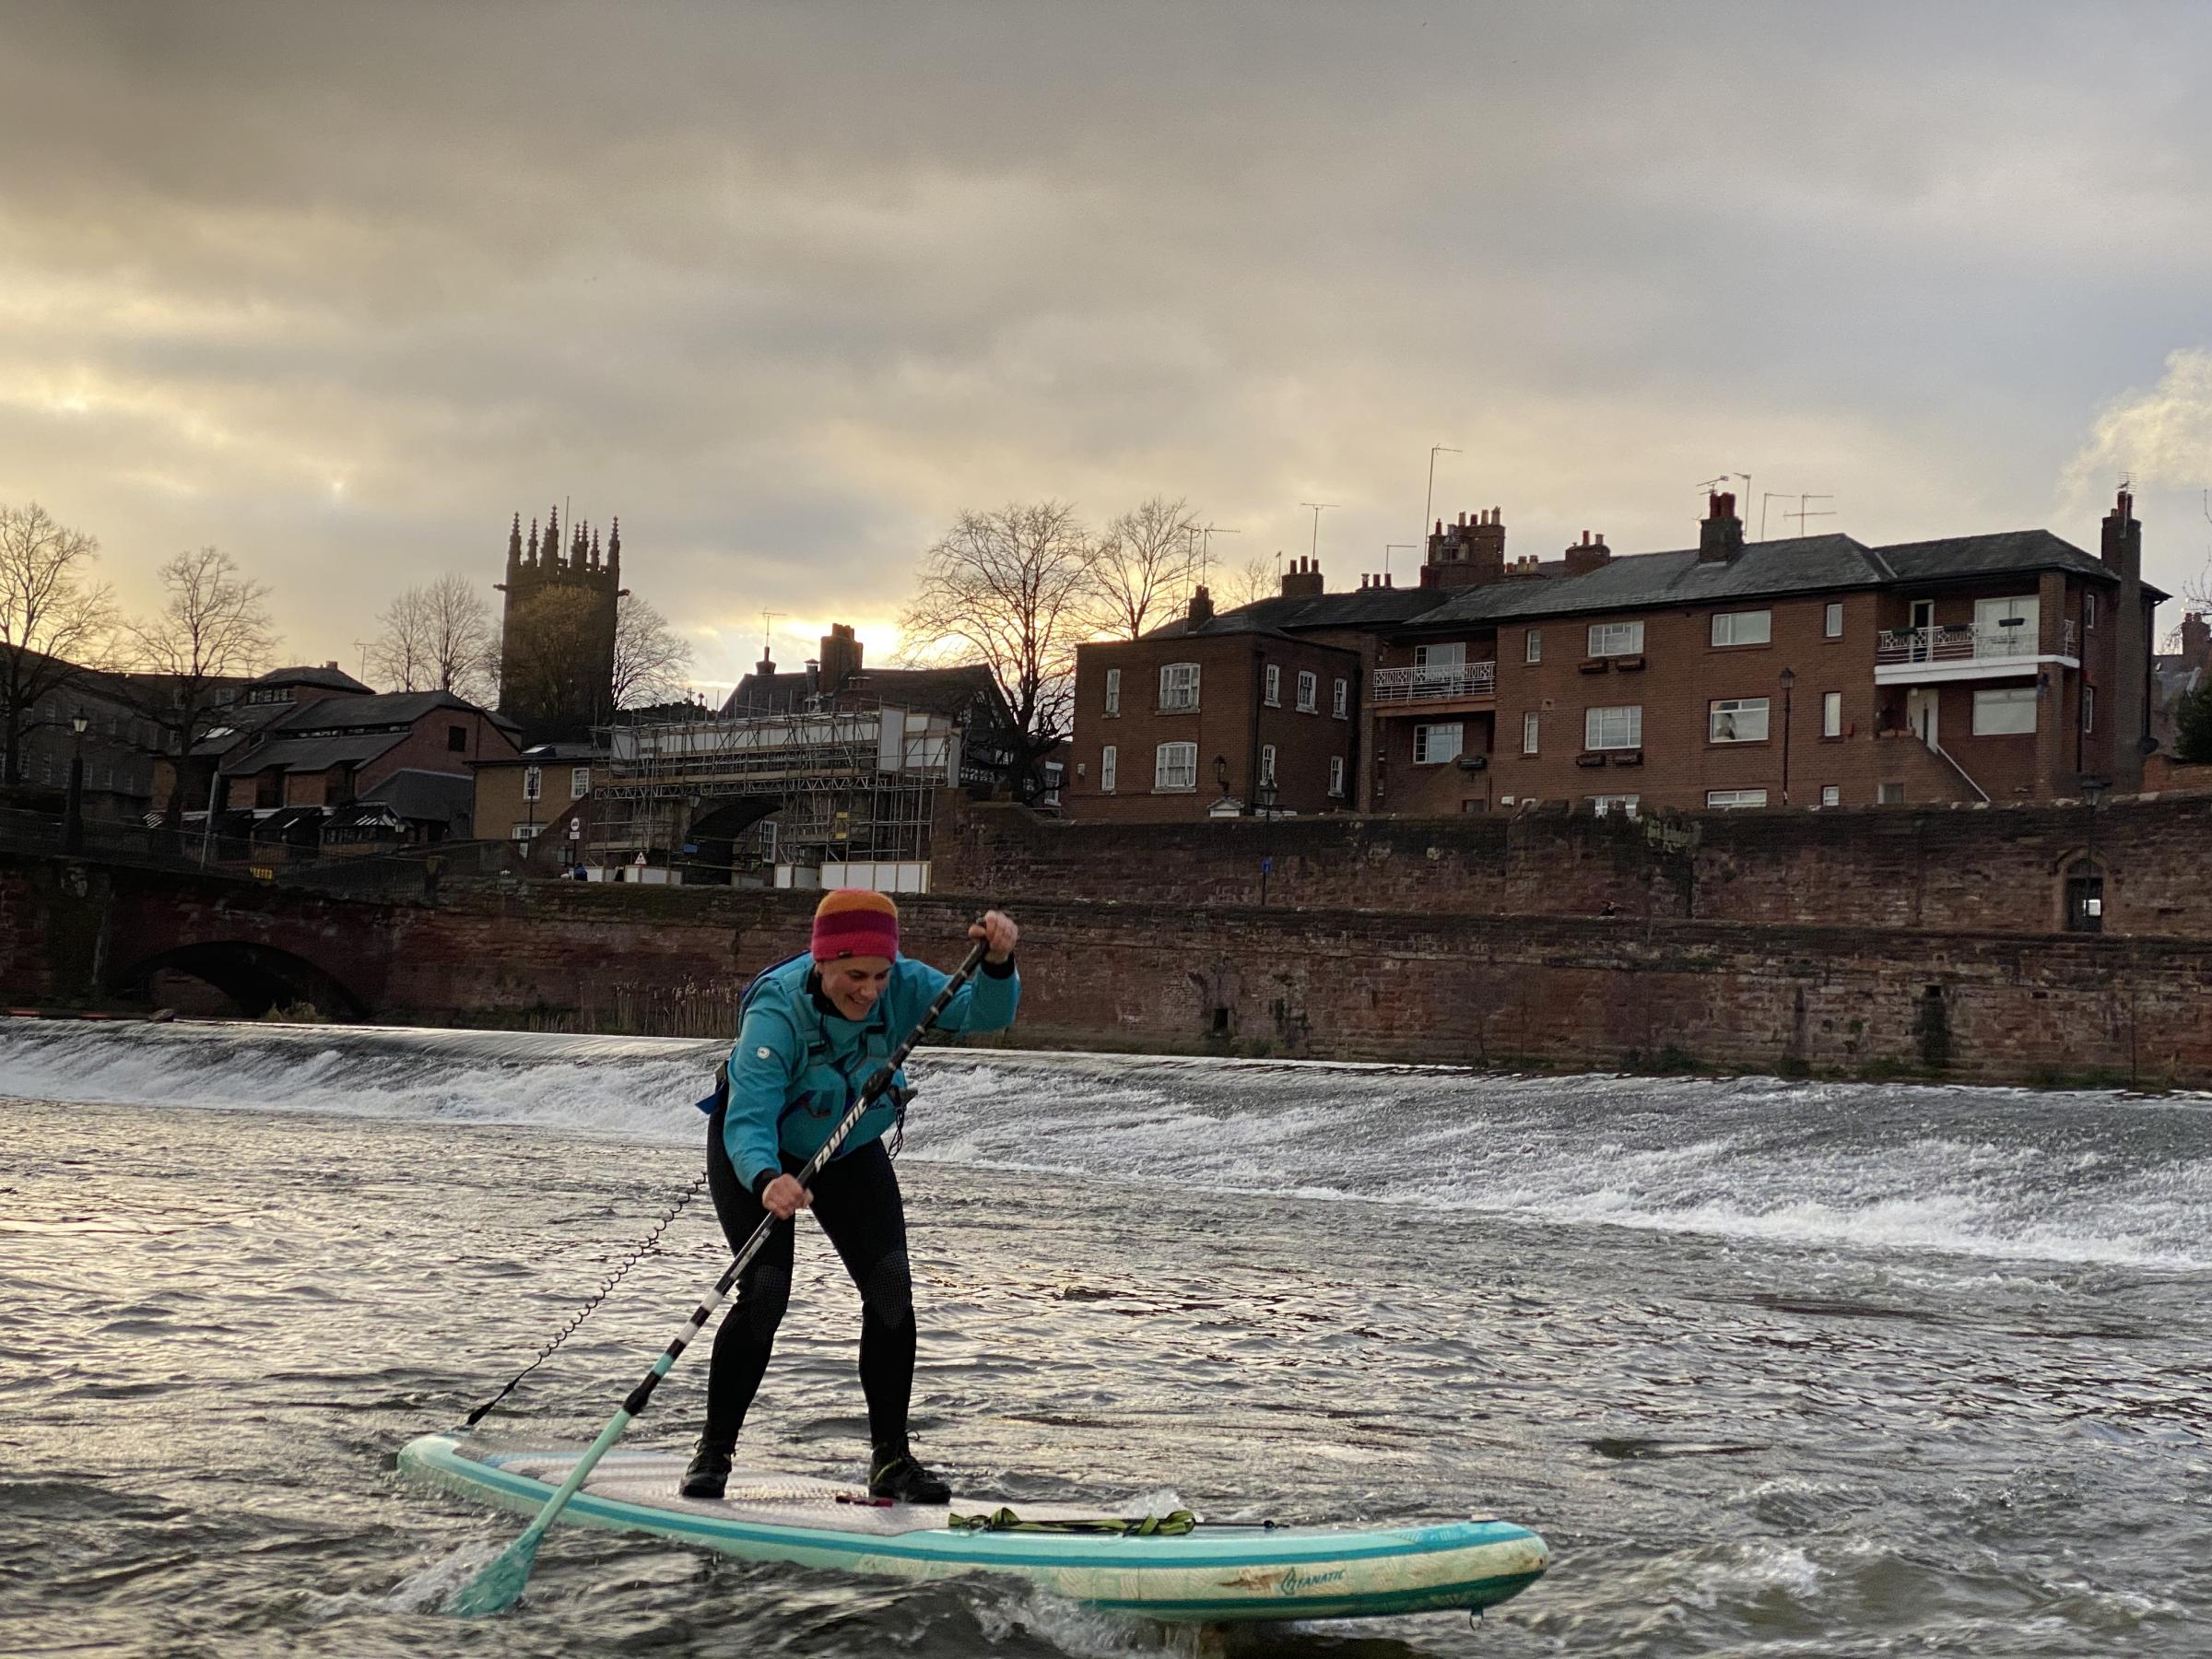 Paddleboarding on the River Dee, Chester.